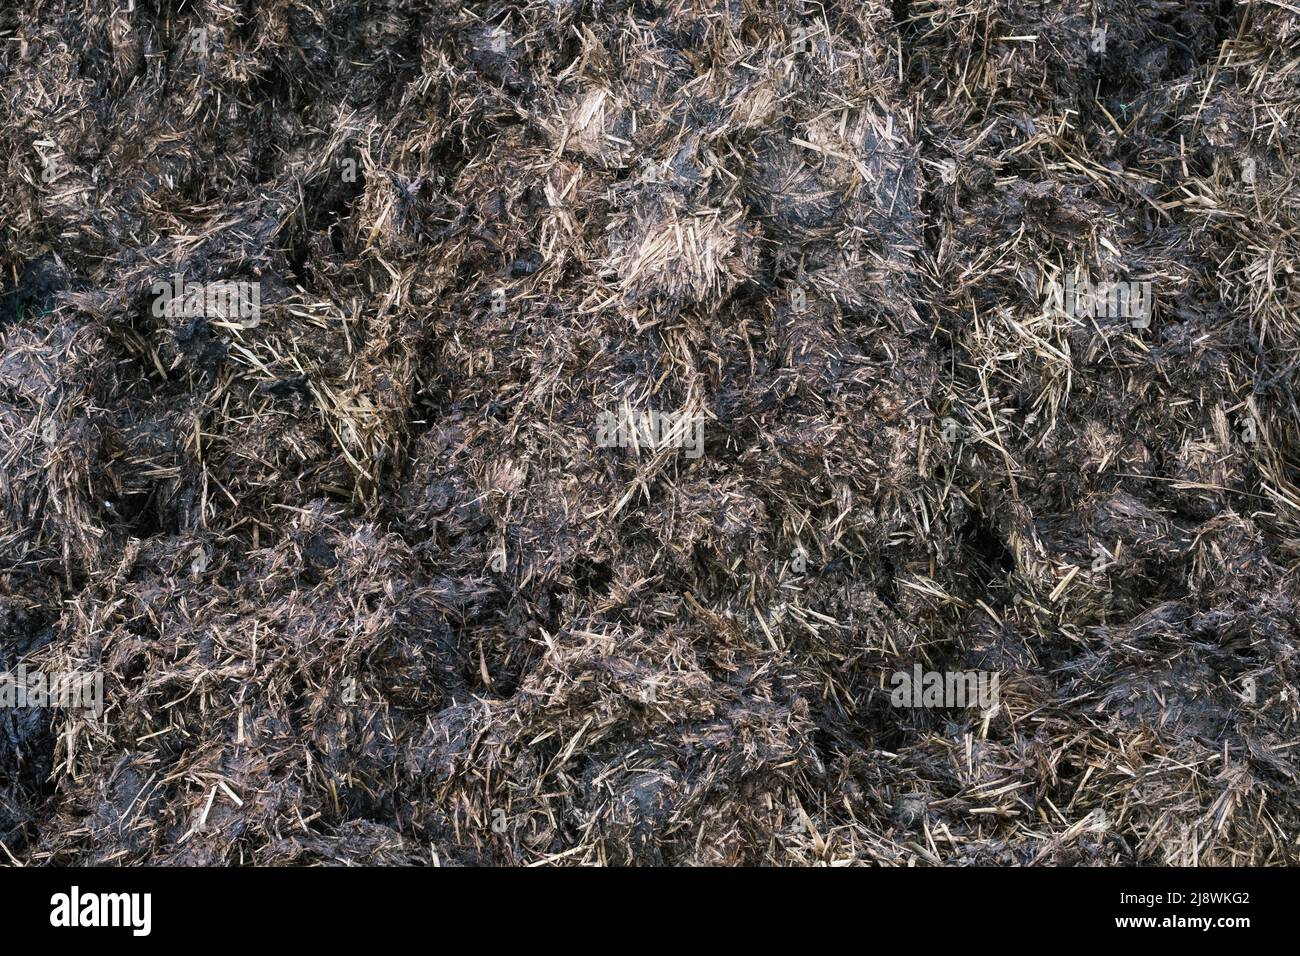 Abstract Background Texture Of Agricultural Manure Stock Photo